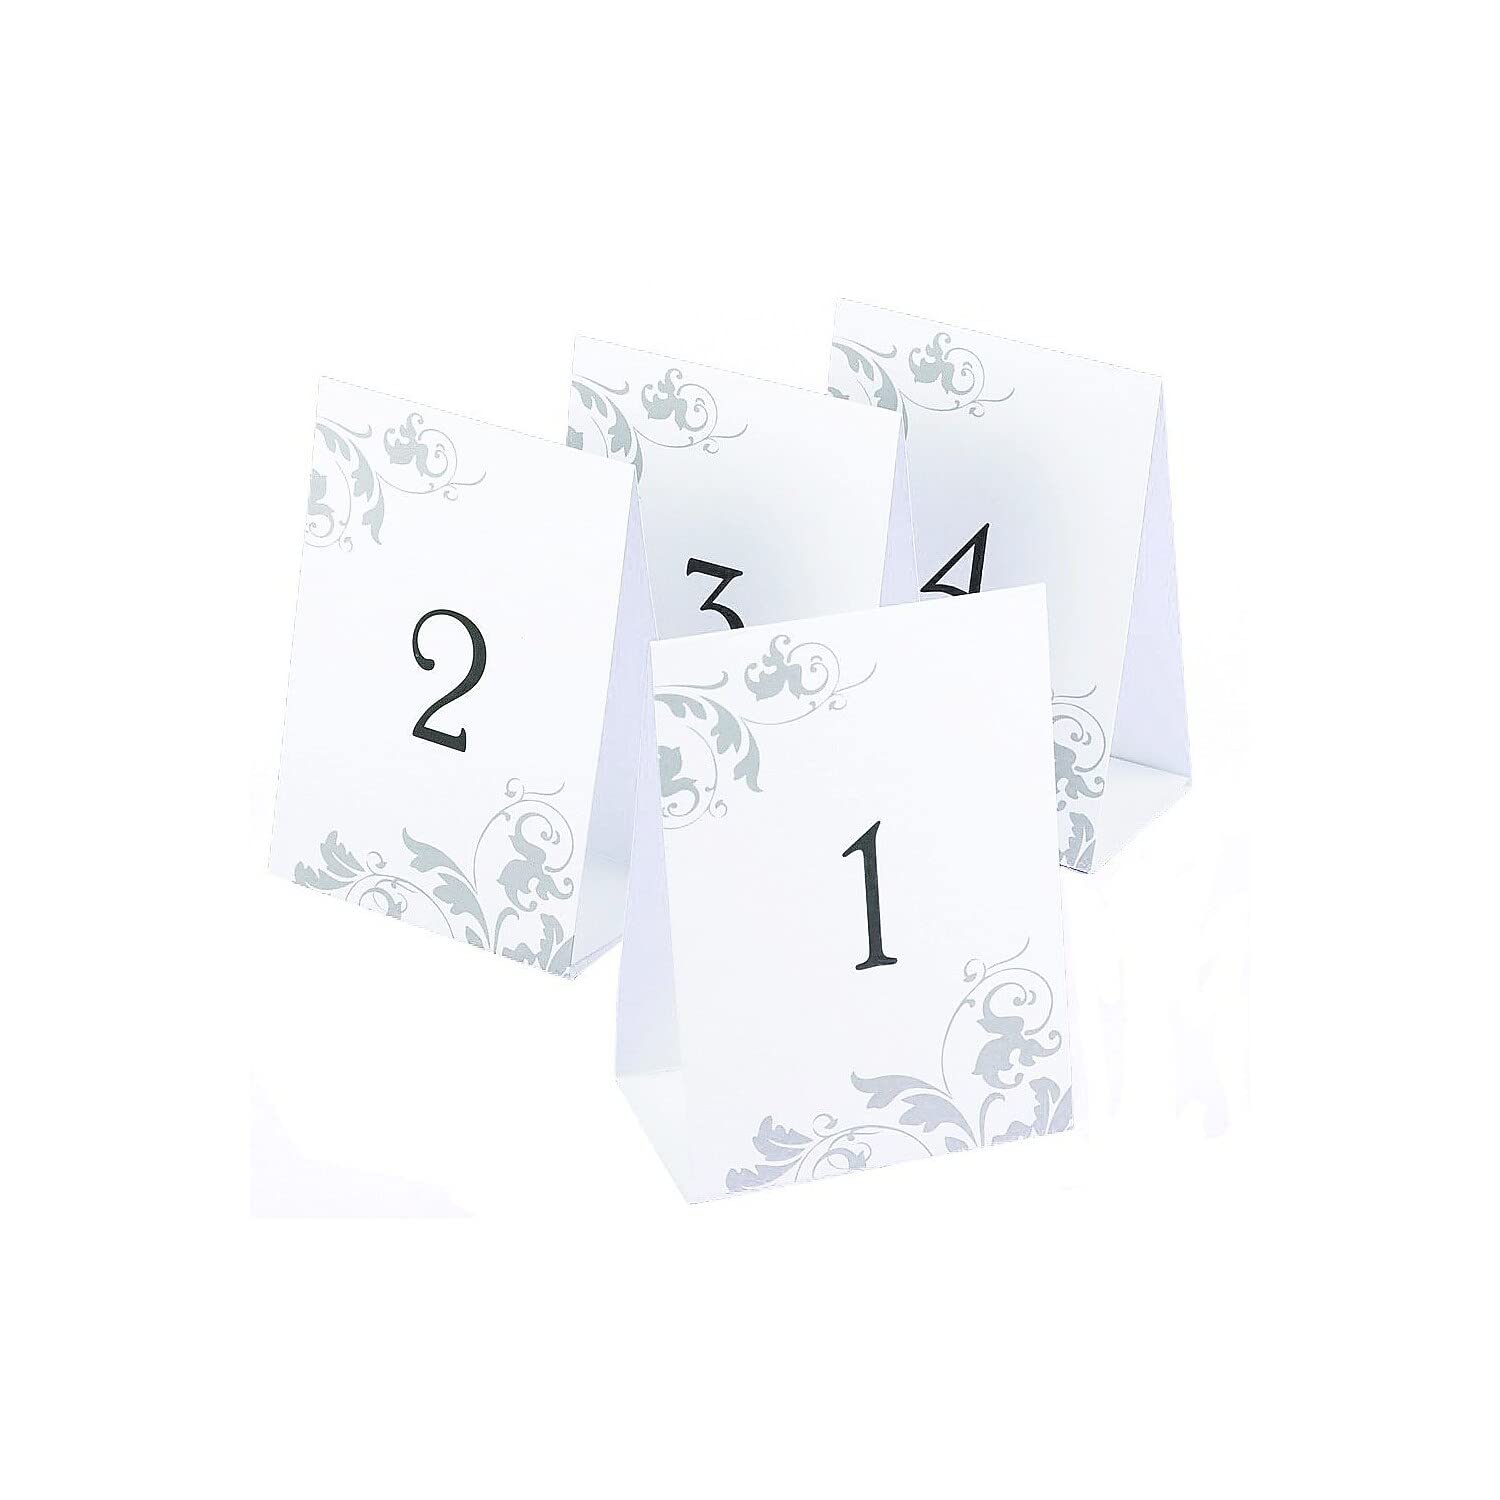 Hortense B. Hewitt HBH Table Number Tents -inch 1-40-inch (51642ST)